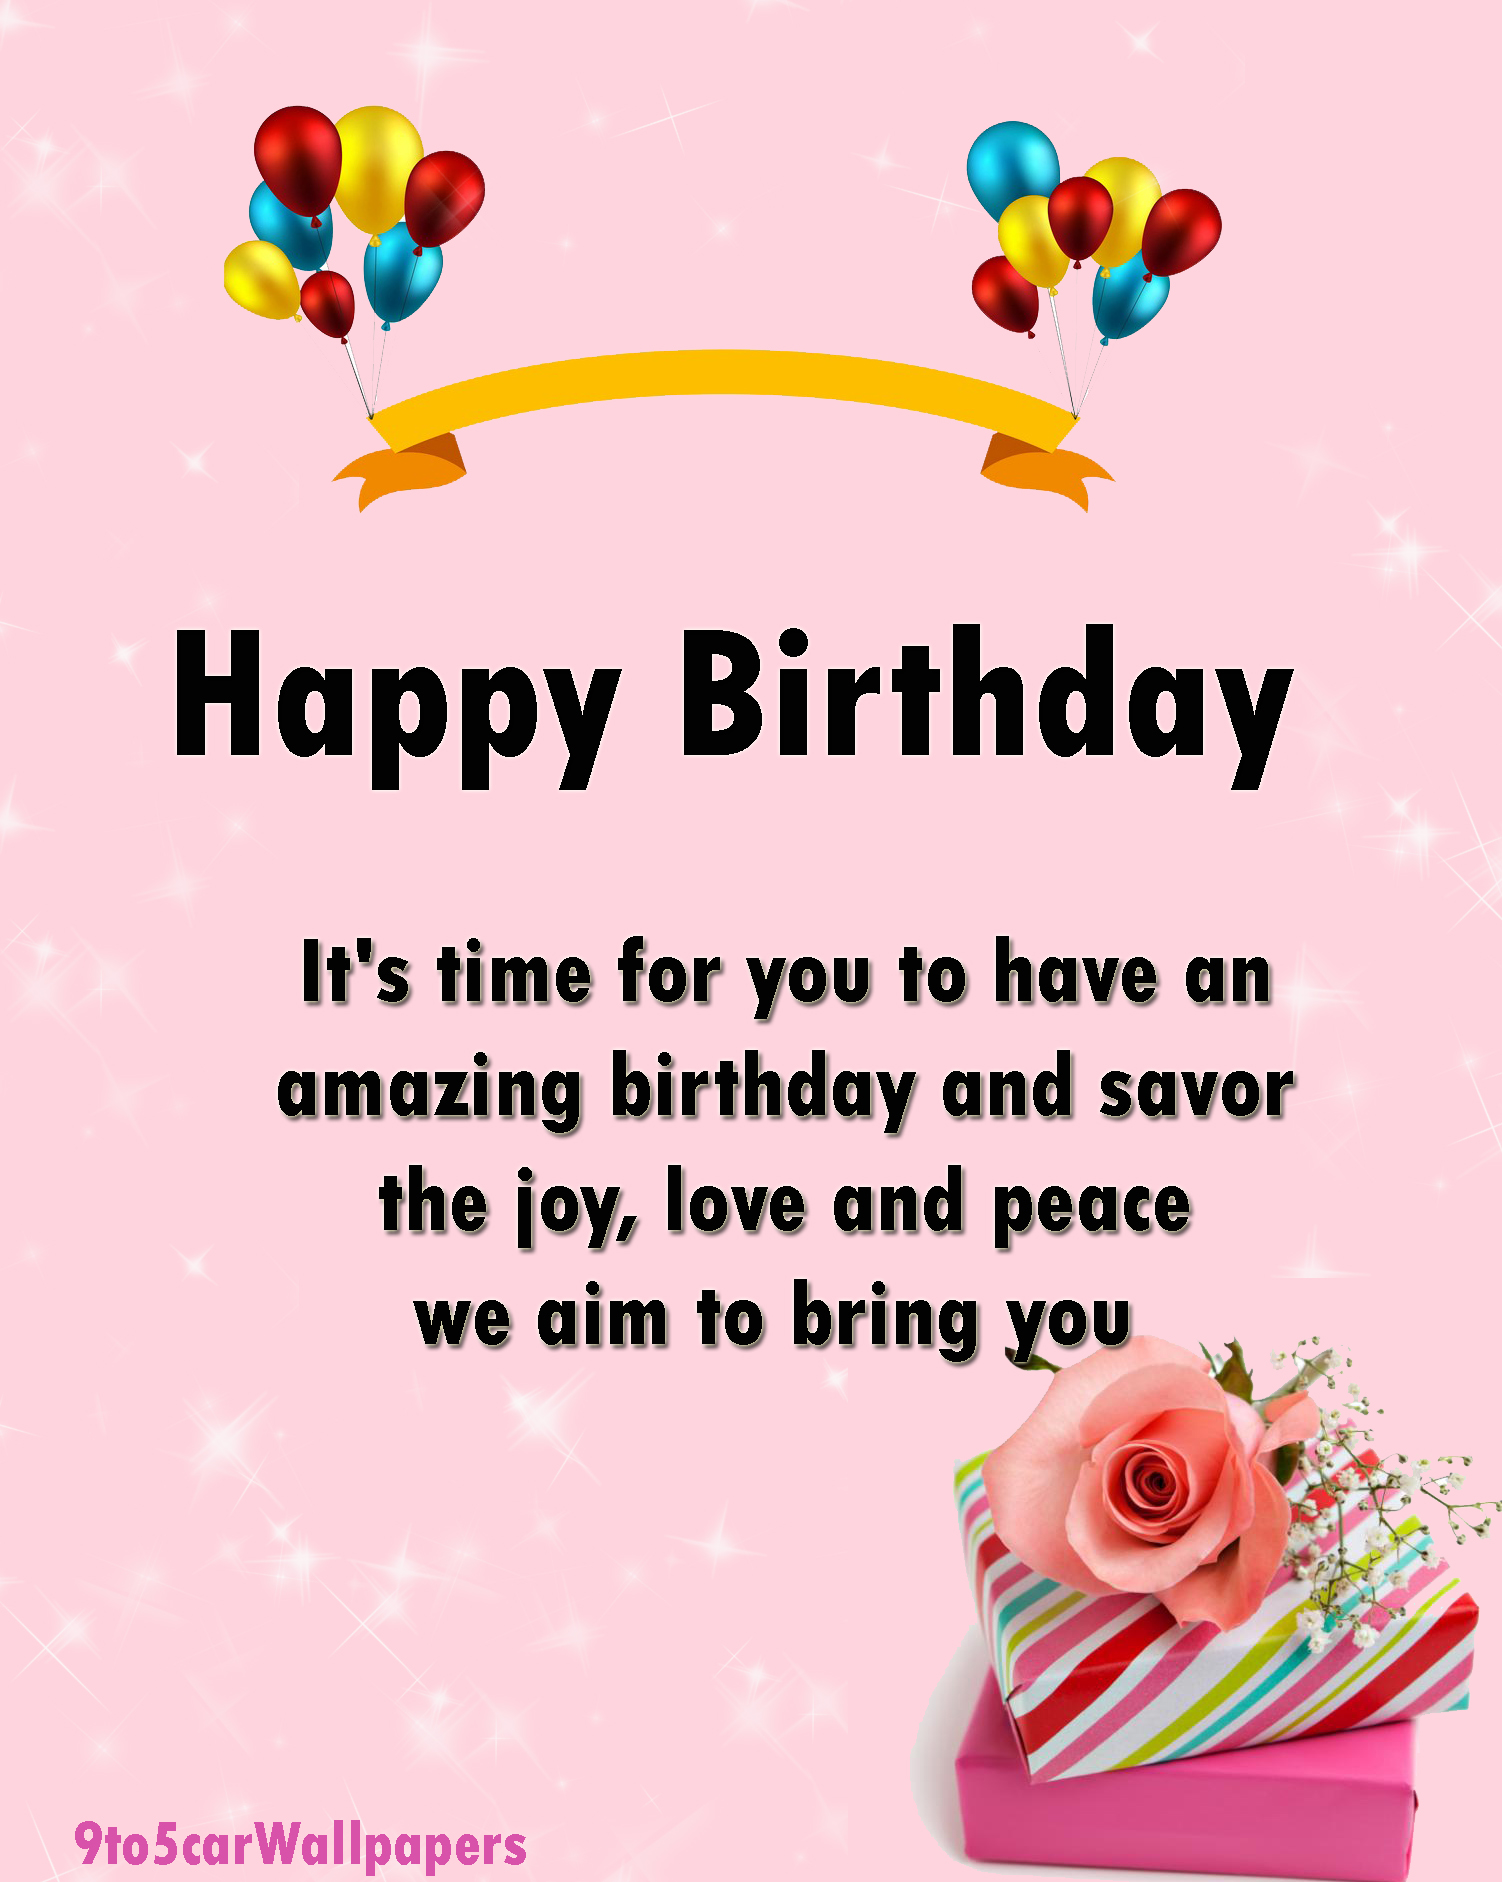 Colourful-happy-birthday-image-free-download